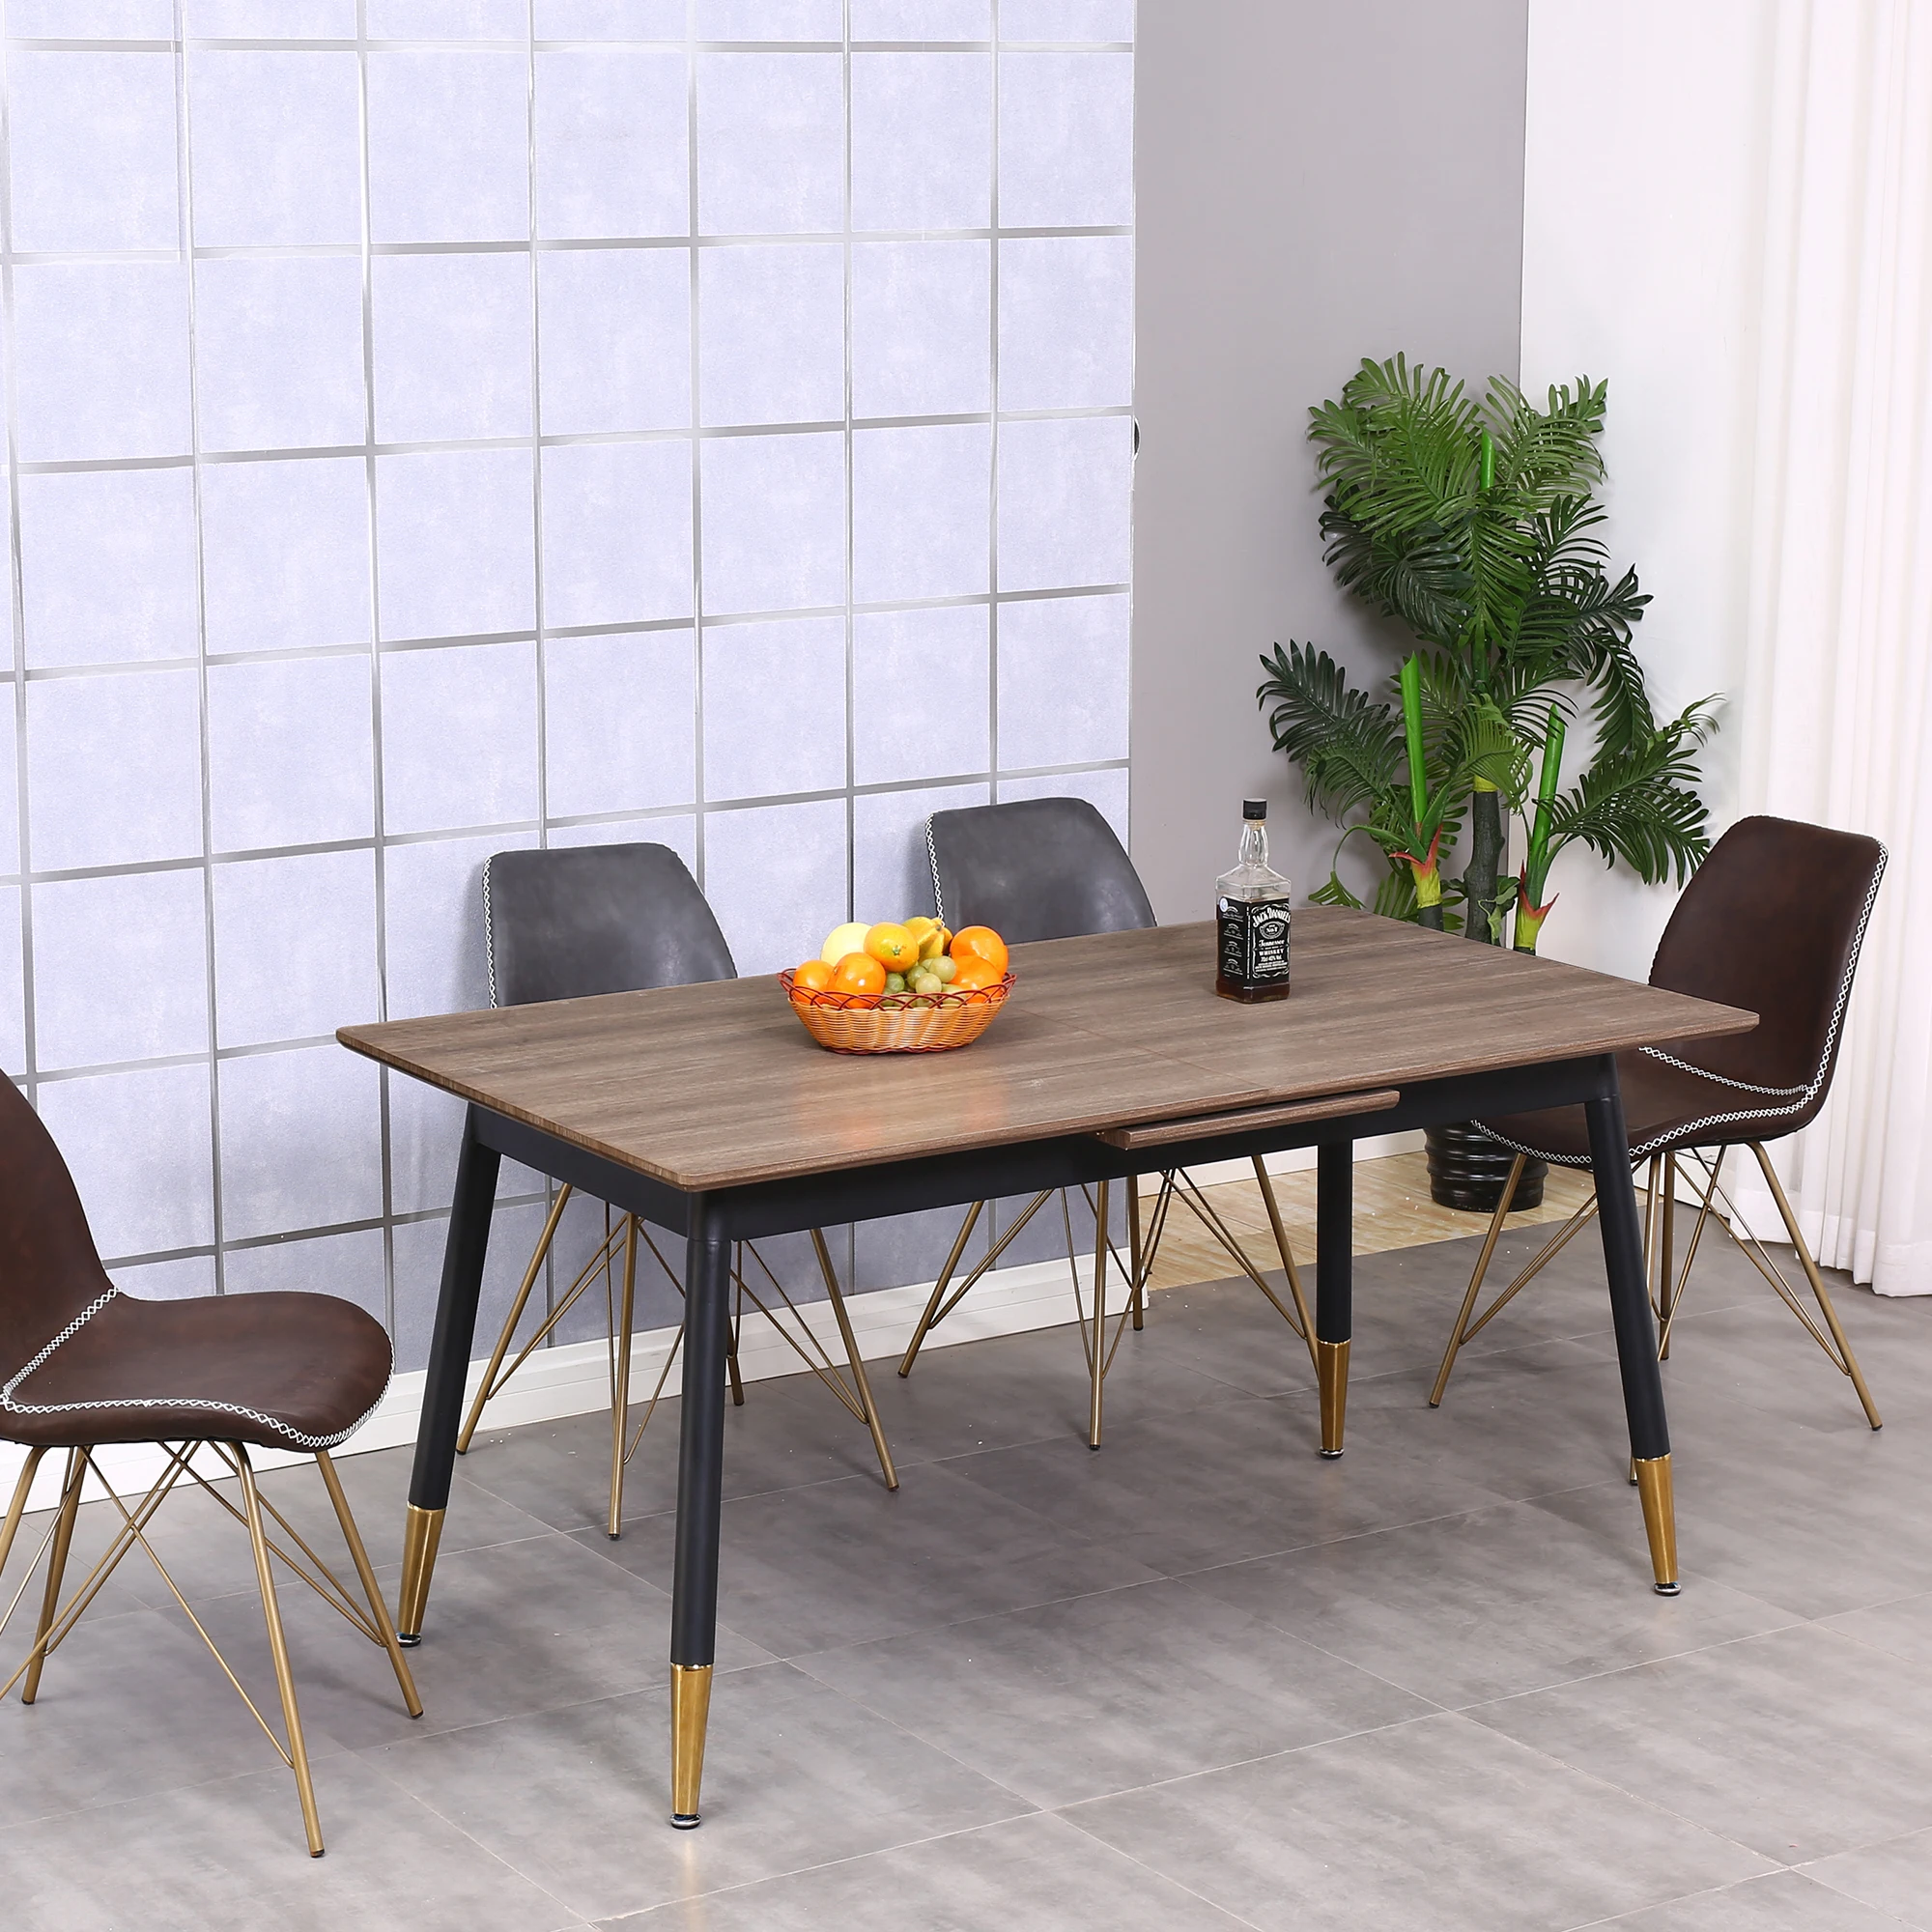 Round Extendable Dining Table Marble Wood Dining Table Table Set 6 Chairs With Low Price Buy Round Extendable Dining Table Marble Wood Dining Table Dining Table Set 6 Chairs Product On Alibaba Com